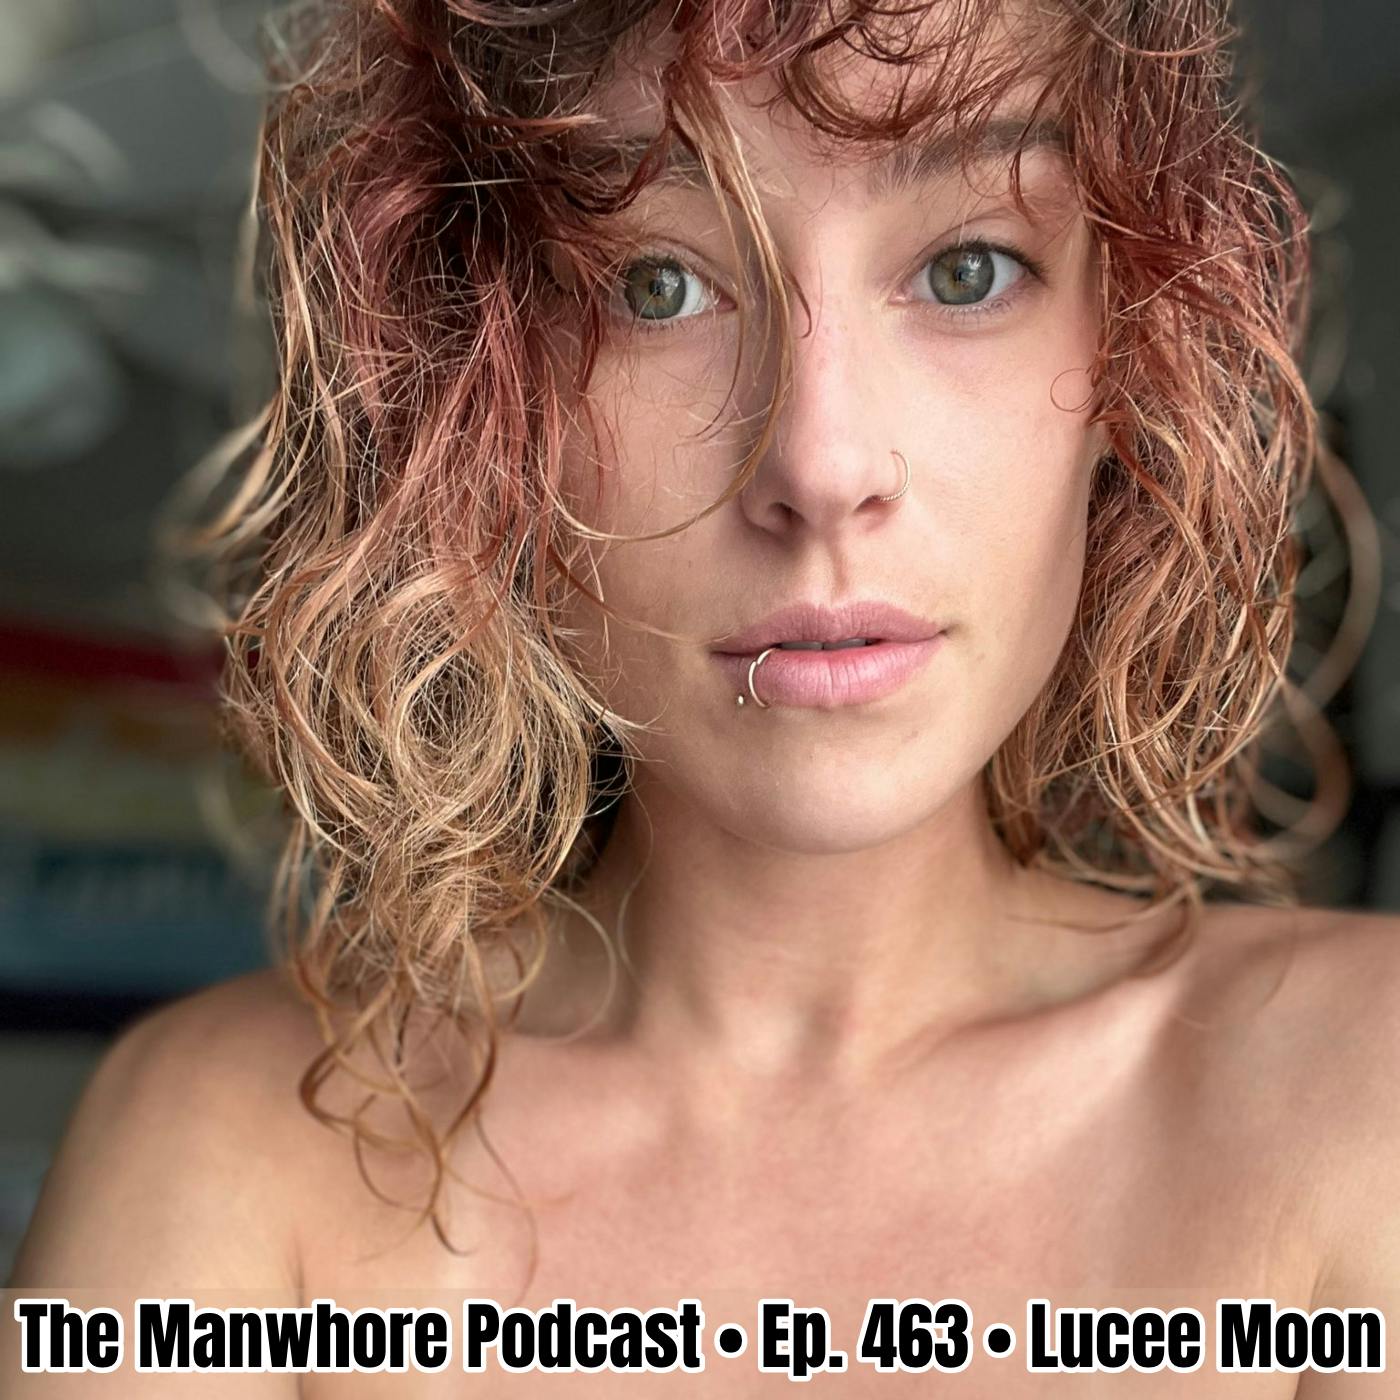 The Manwhore Podcast: A Sex-Positive Quest - Ep. 463: Lucee Moon Doesn&#x27;t Fuck Me Anymore